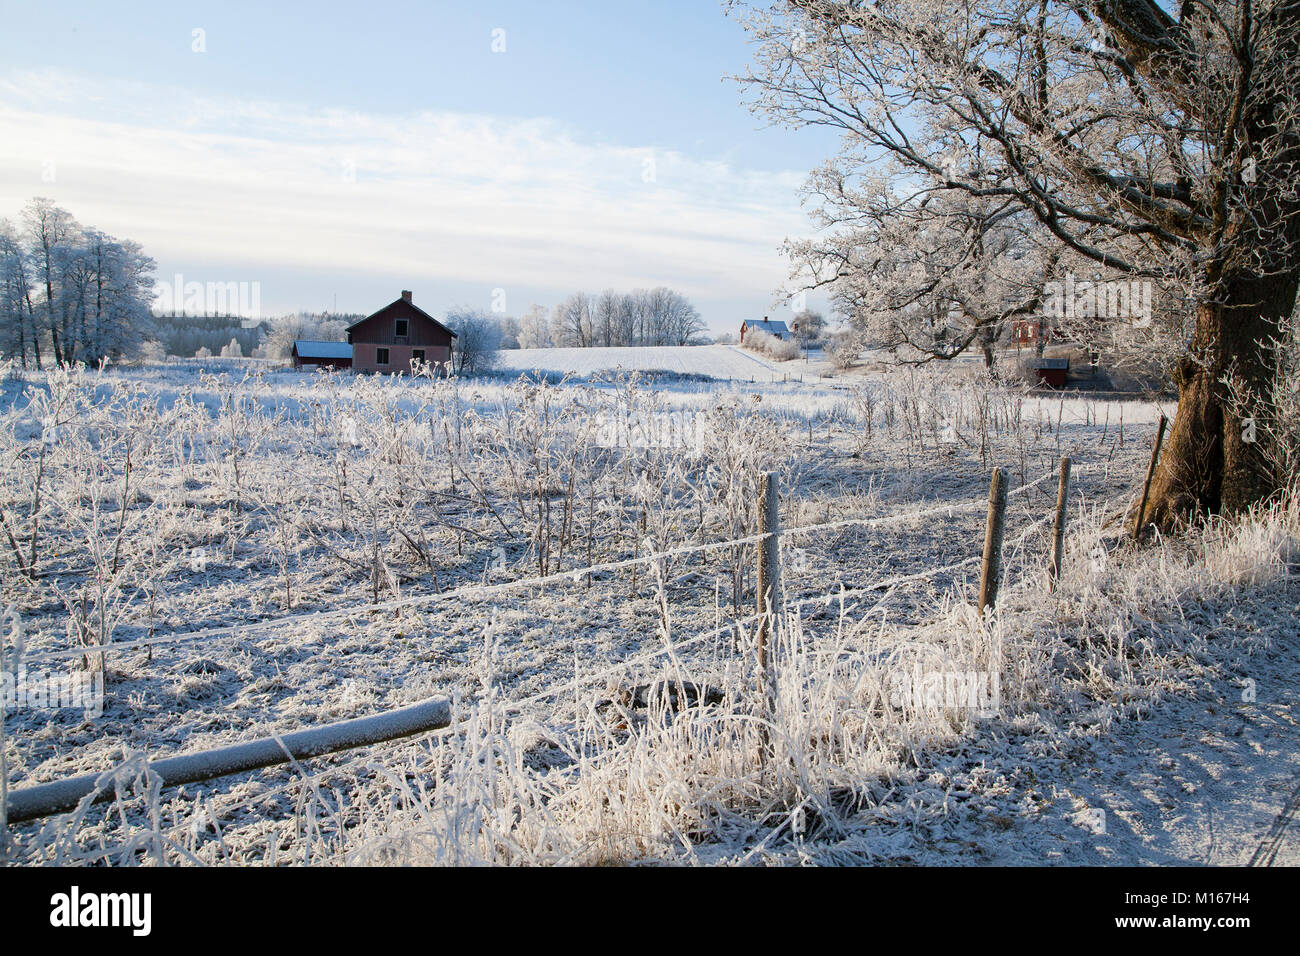 FARMHOUSE on the field with frosty vegetation Stock Photo